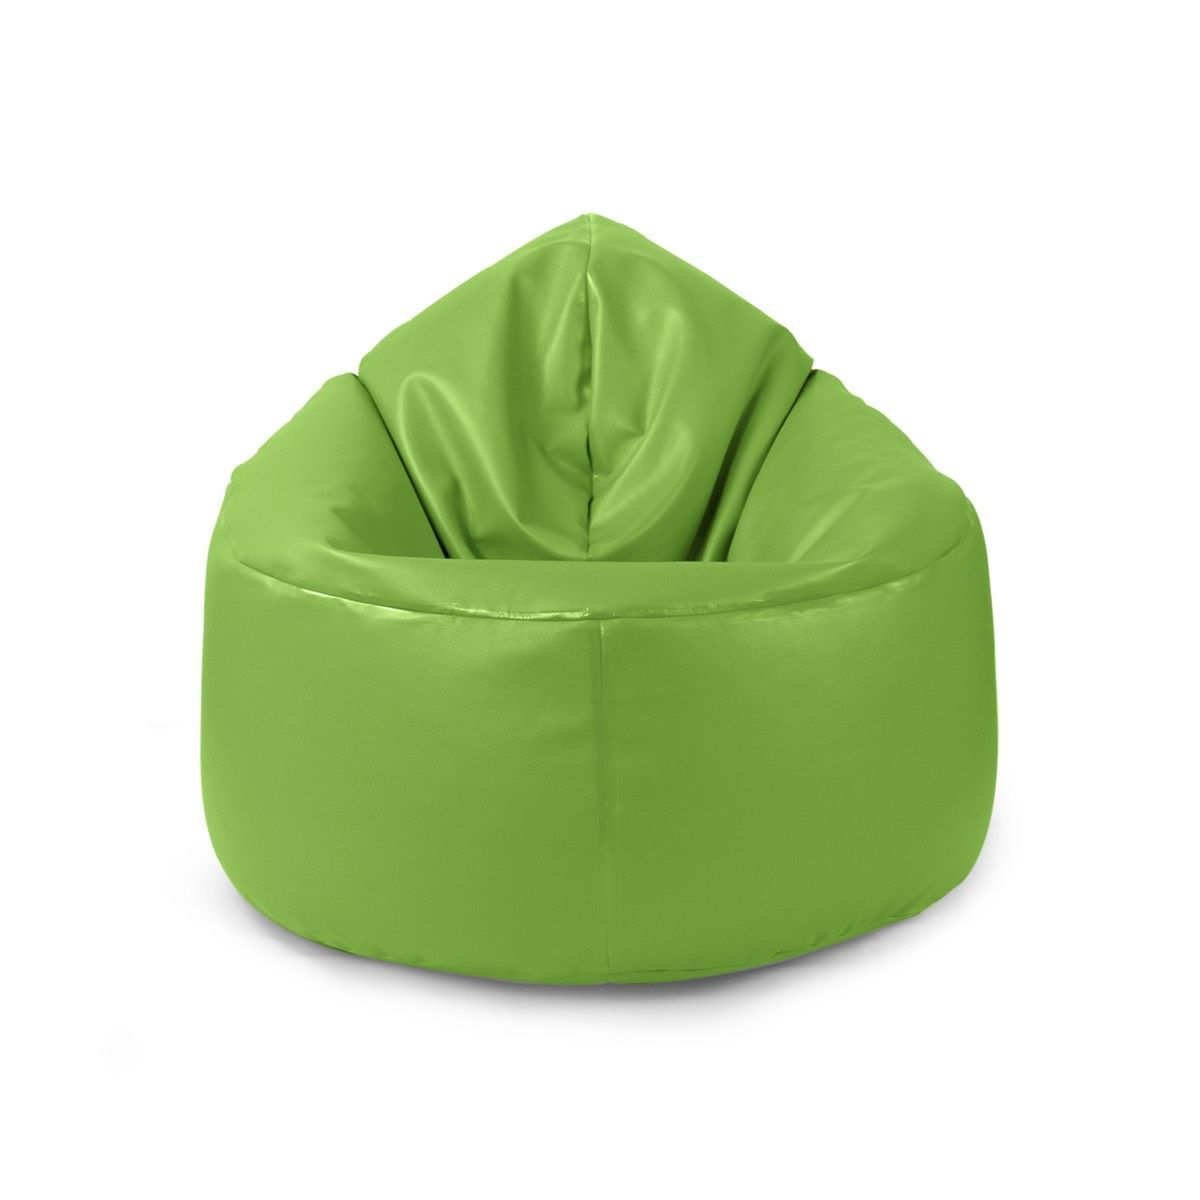 Waterproof Sensory Bean Bag  - available in 4 sizes